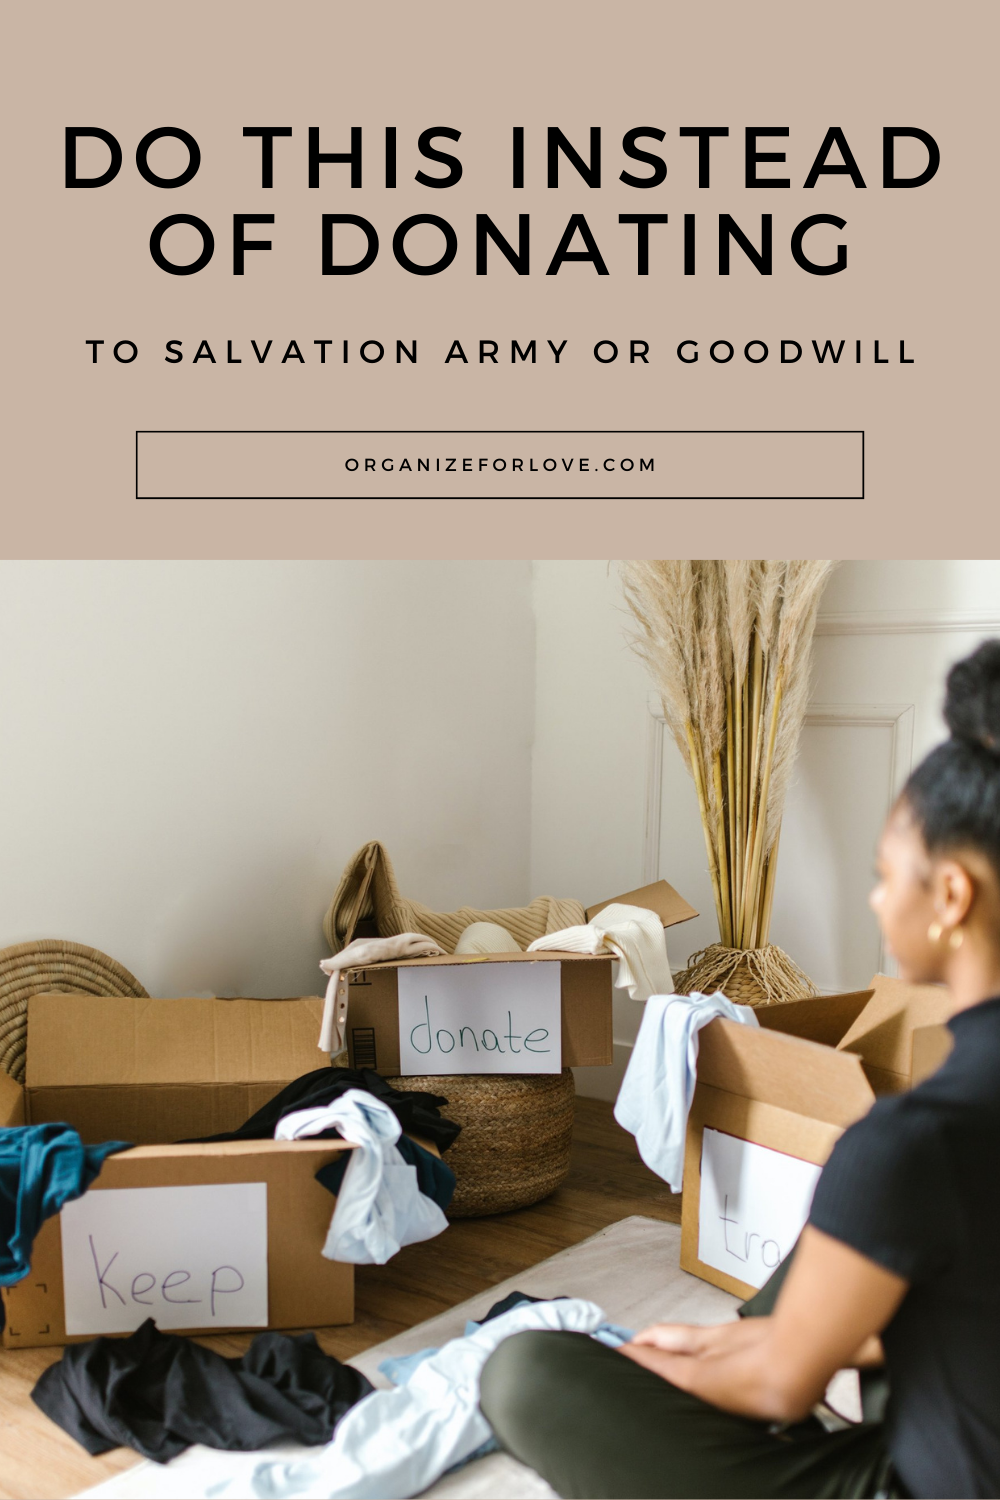 Do THIS instead of donating to Salvation Army or Goodwill